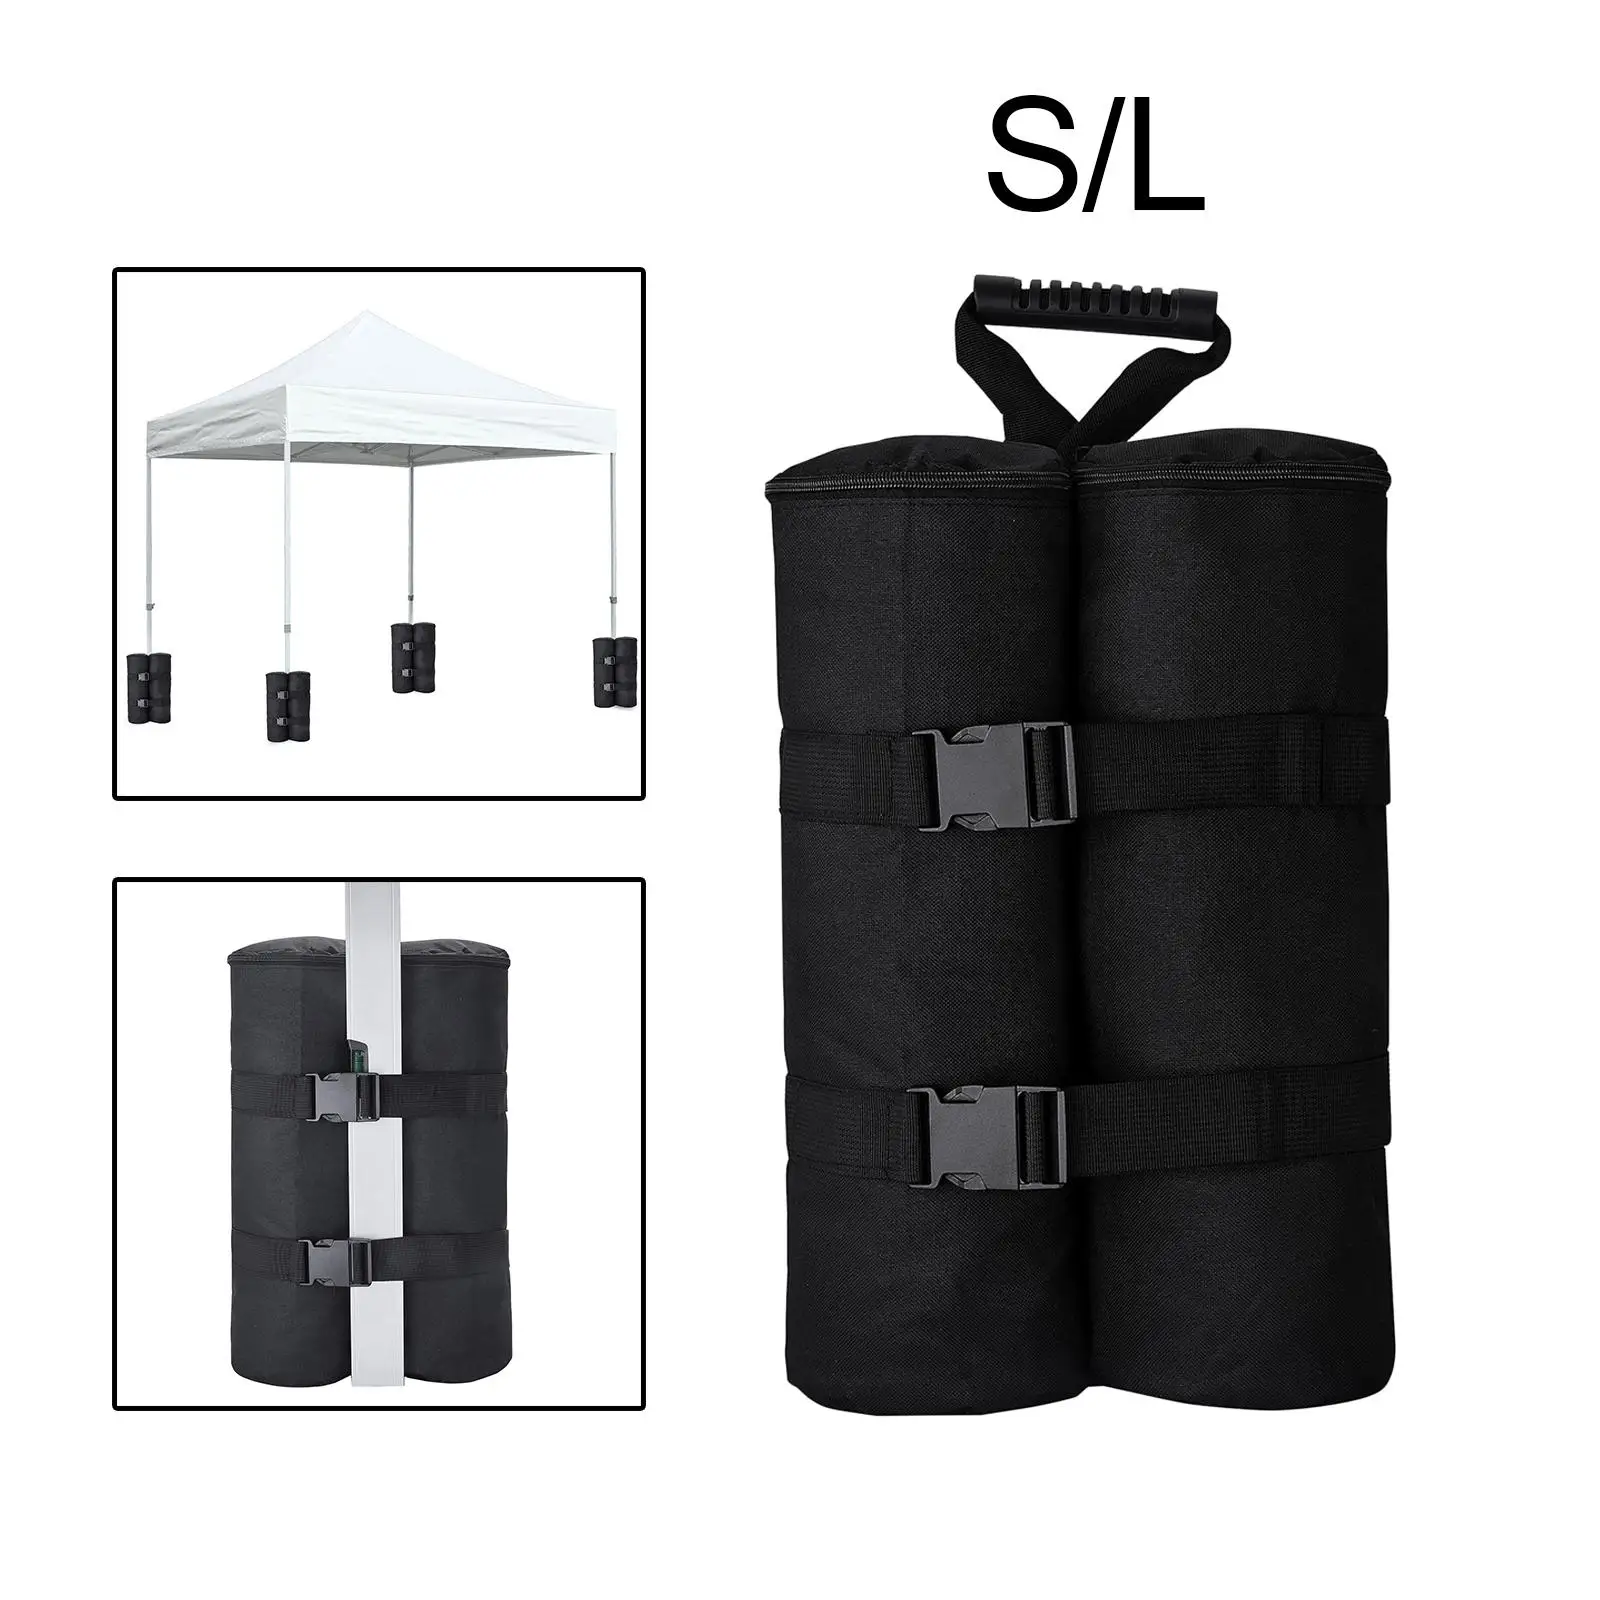 Large Weight Bags for Canopy, Canopy Weight Sandbag Fixed Leg Weights Sand Bag for Outdoor Patio Umbrella Base, No Sands